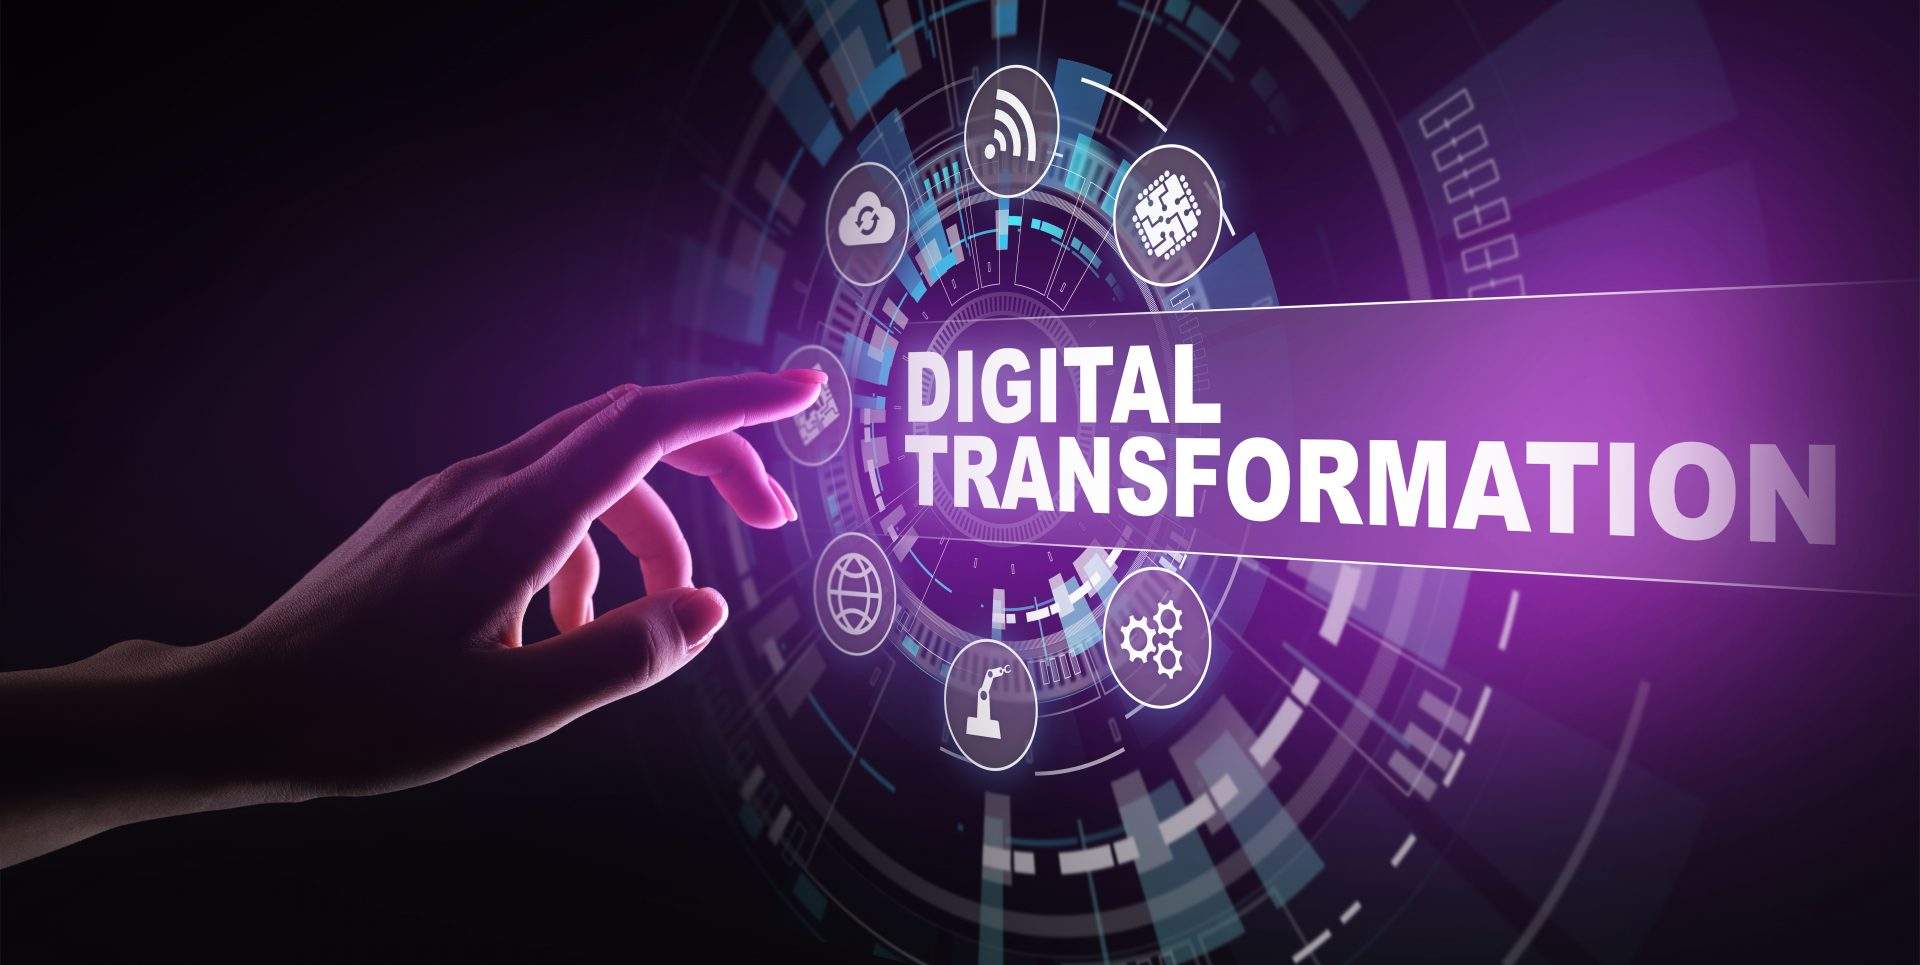 Do you think Digital Transformation is necessary for schools?